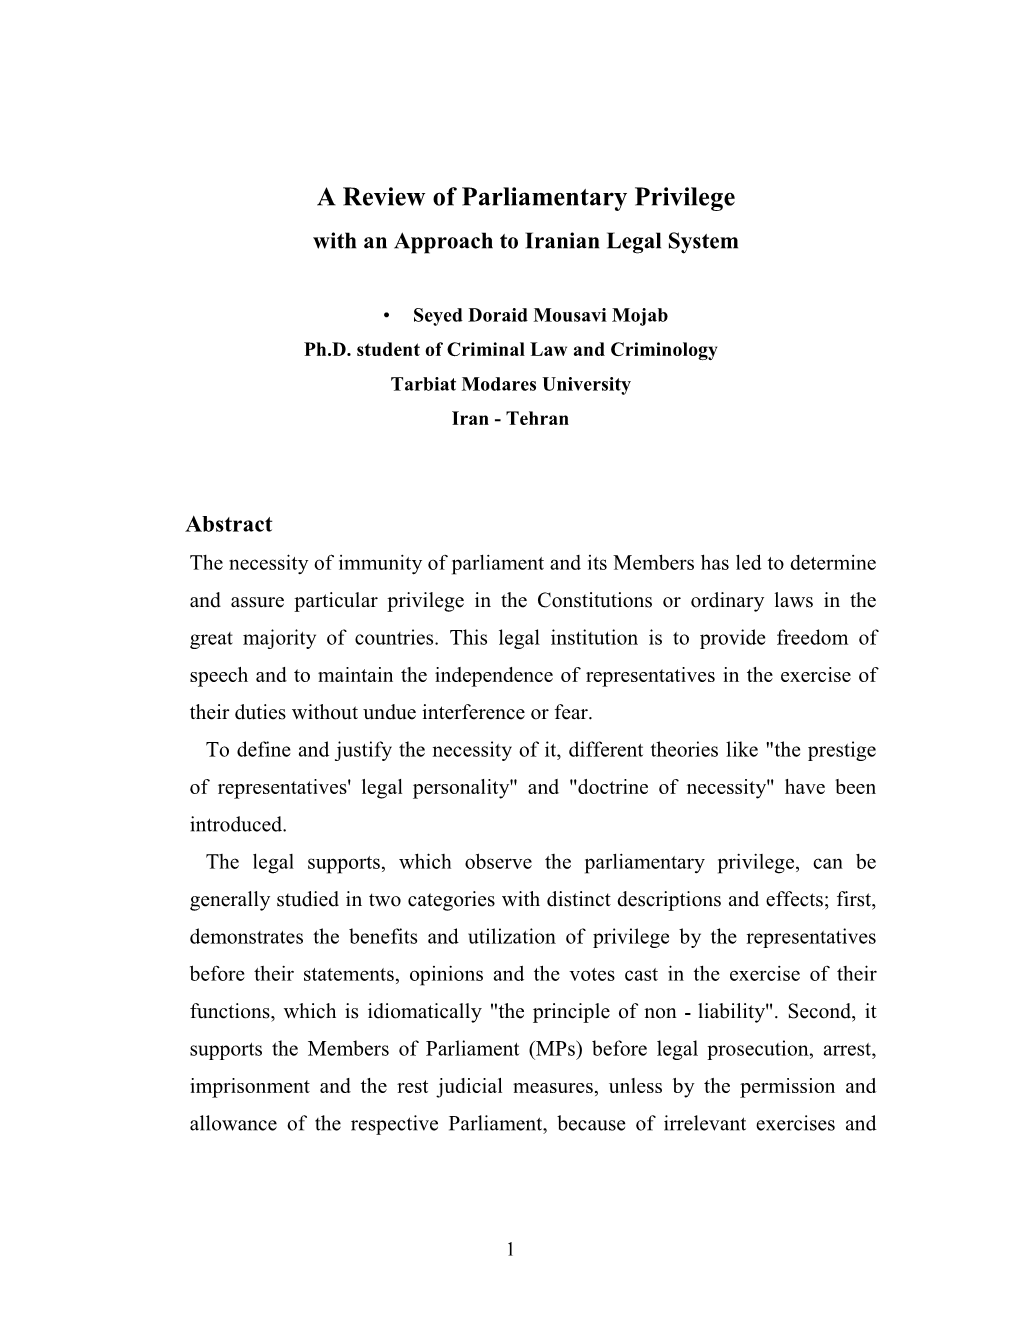 A Review of Parliamentary Privilege with an Approach to Iranian Legal System